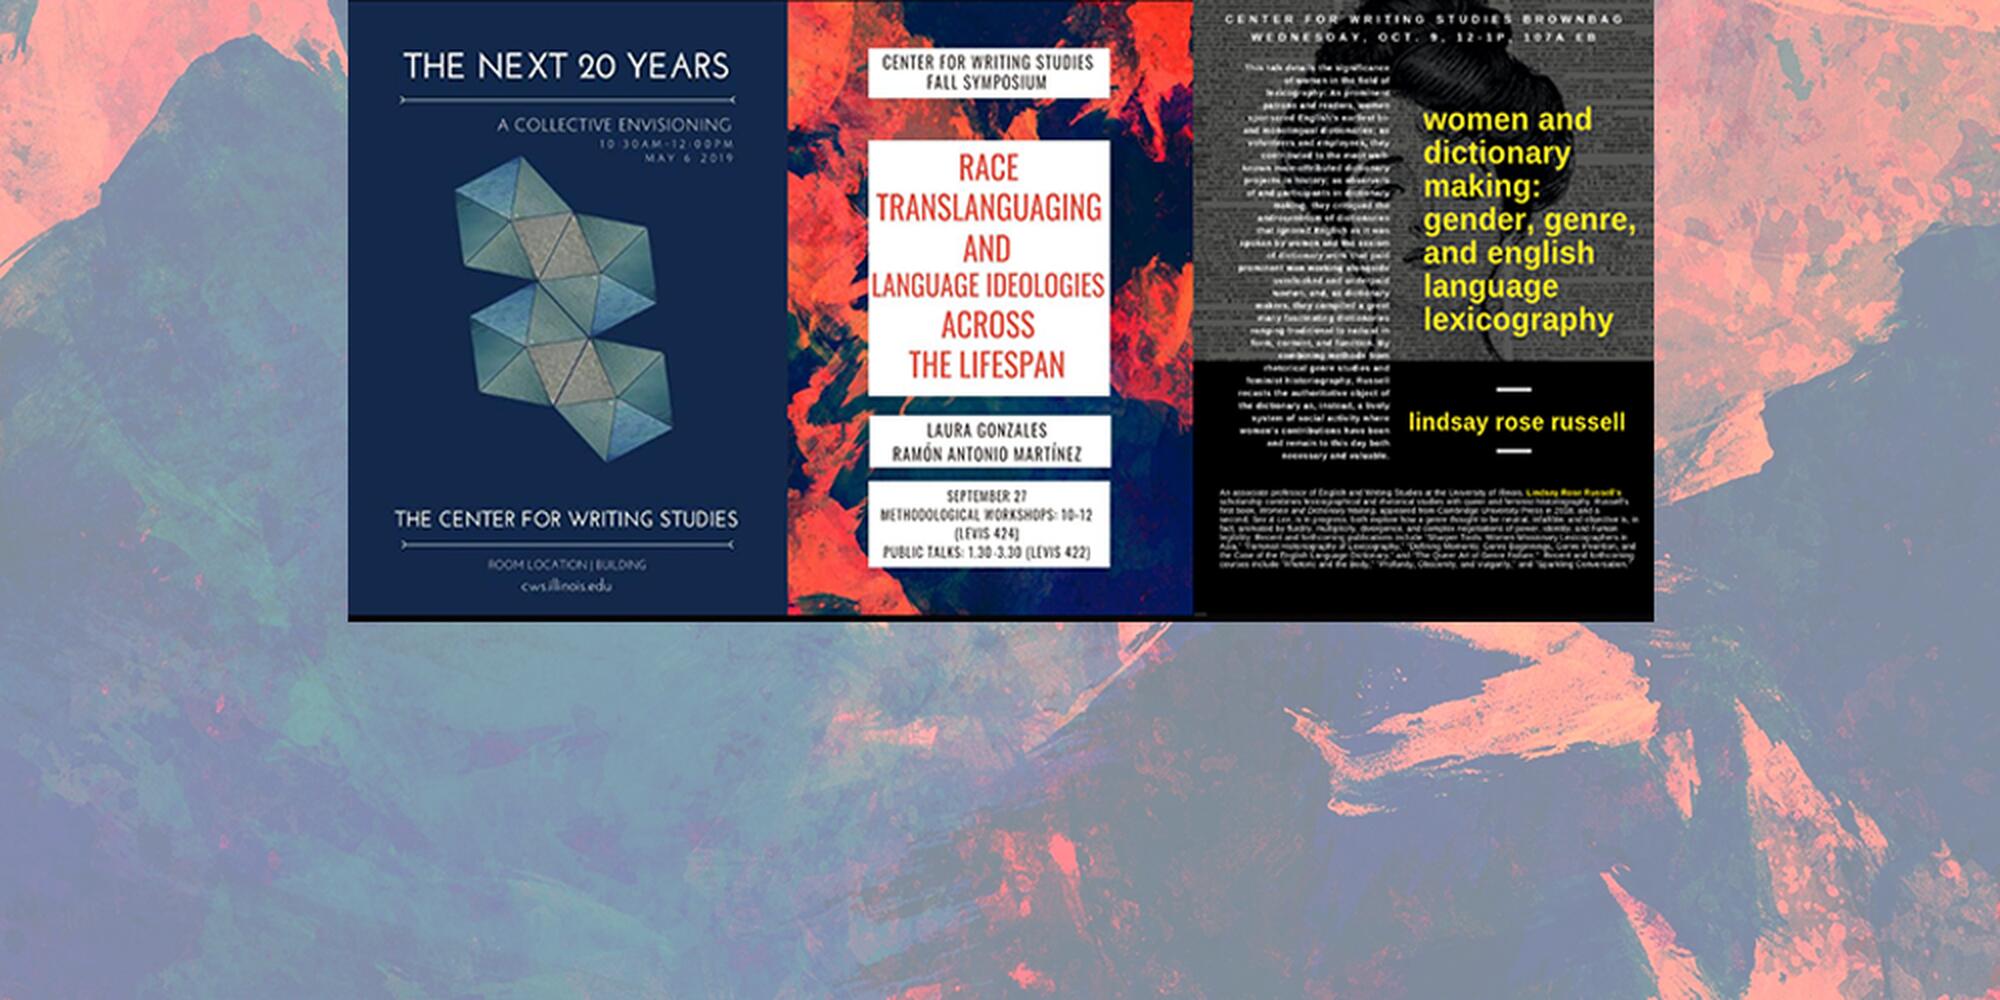 A triptych of three CWS flyers. The first is for an event titled "The Next 20 Years" and features a hexagonal geometric design against a blue background. The second is for a symposium event called "Race, Translanguaging, and Language Ideologies Across the Lifespan" and appears with an abstract orange / blue paint-style background. The third flyer is for a brownbag titled "Women and Dictionary Making: Gender, Genre, and English Language Lexicography." Features an image of a 19th-century woman / black BG.